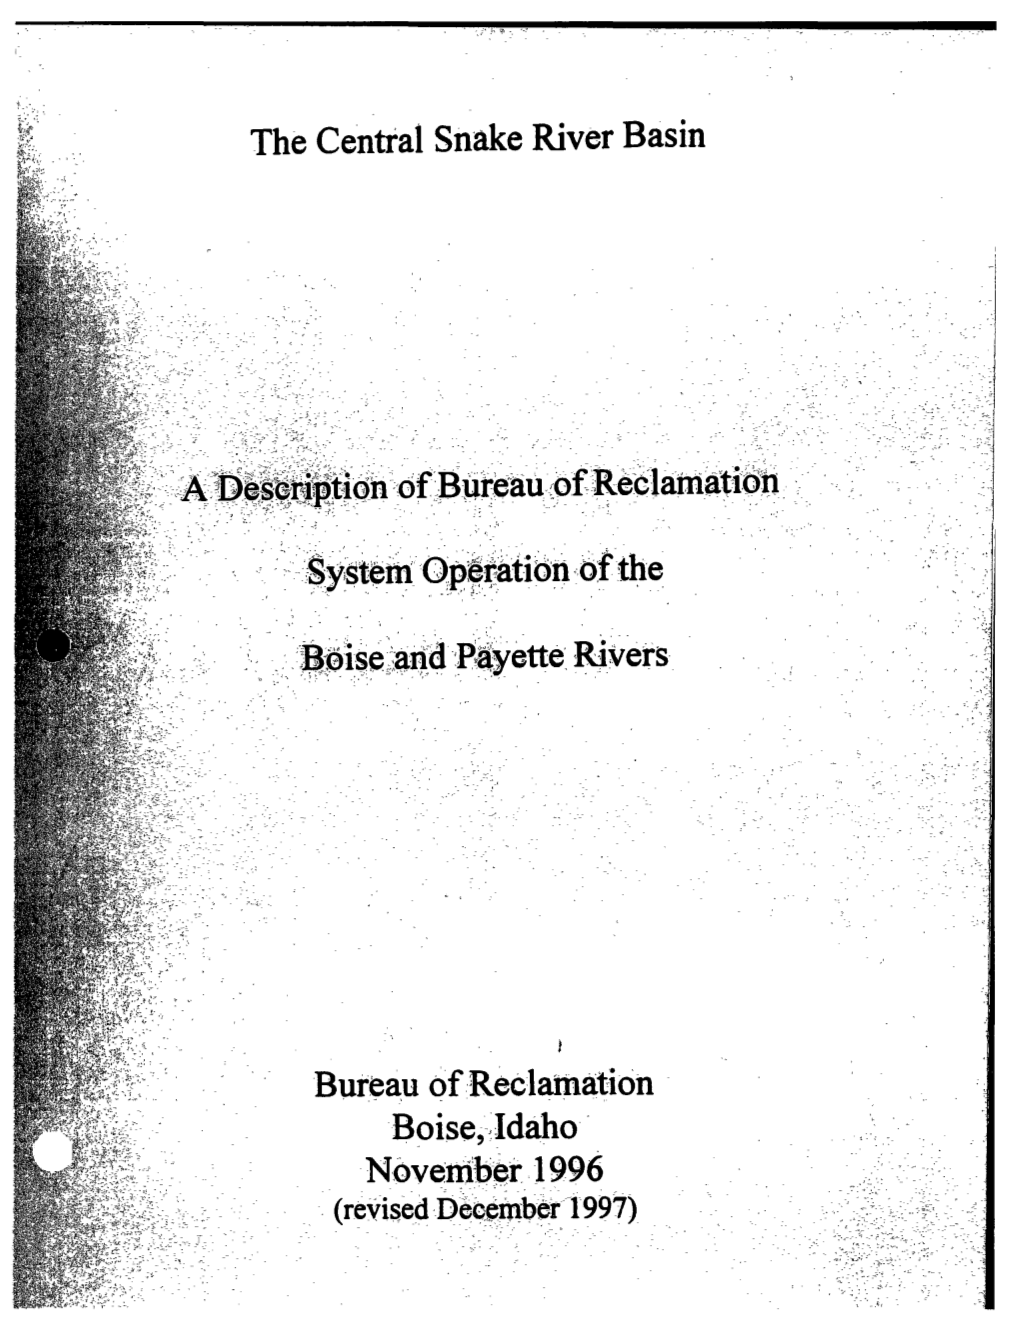 Description of Bureau of Reclamation System Operation of the Boise And